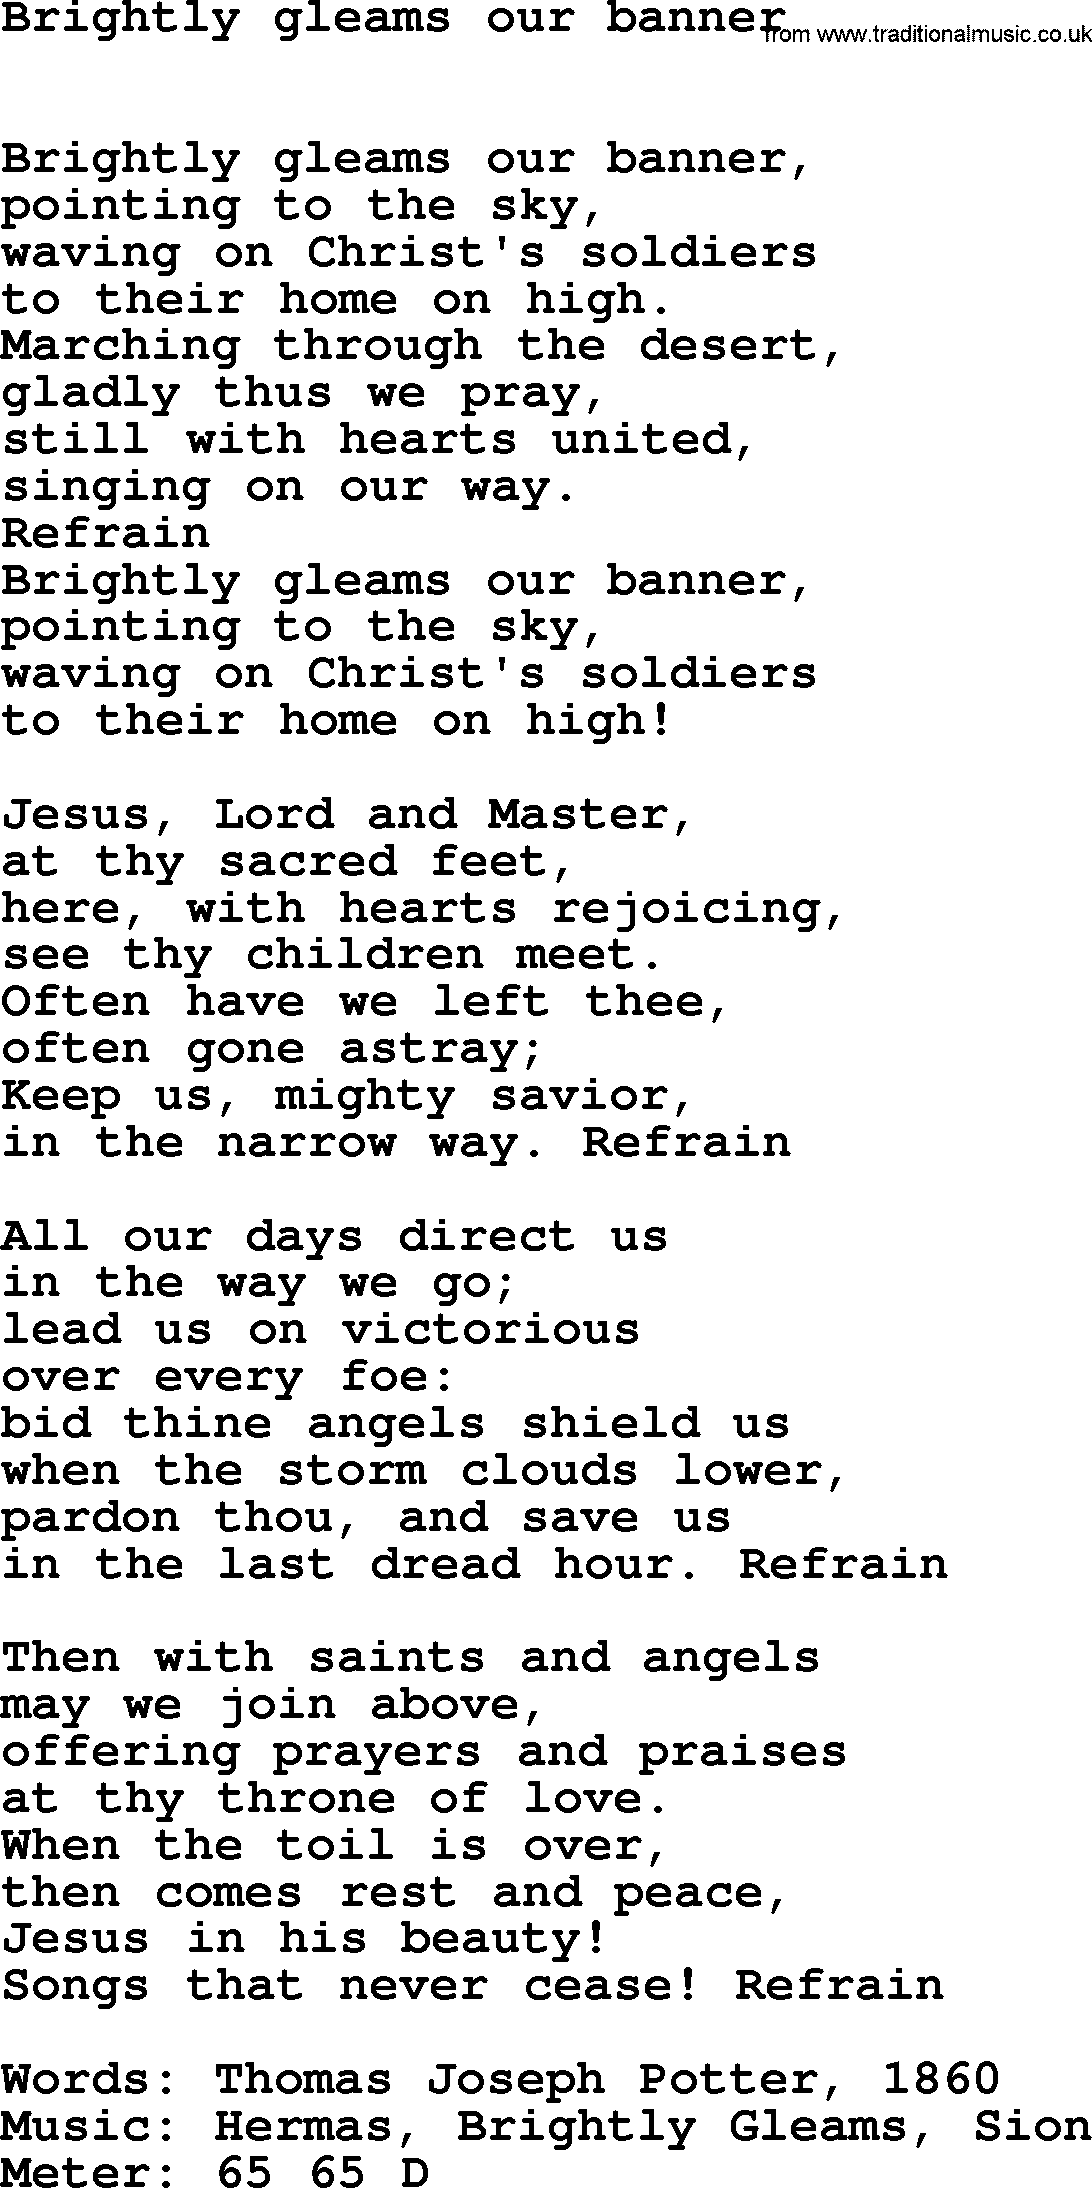 Book of Common Praise Hymn: Brightly Gleams Our Banner.txt lyrics with midi music